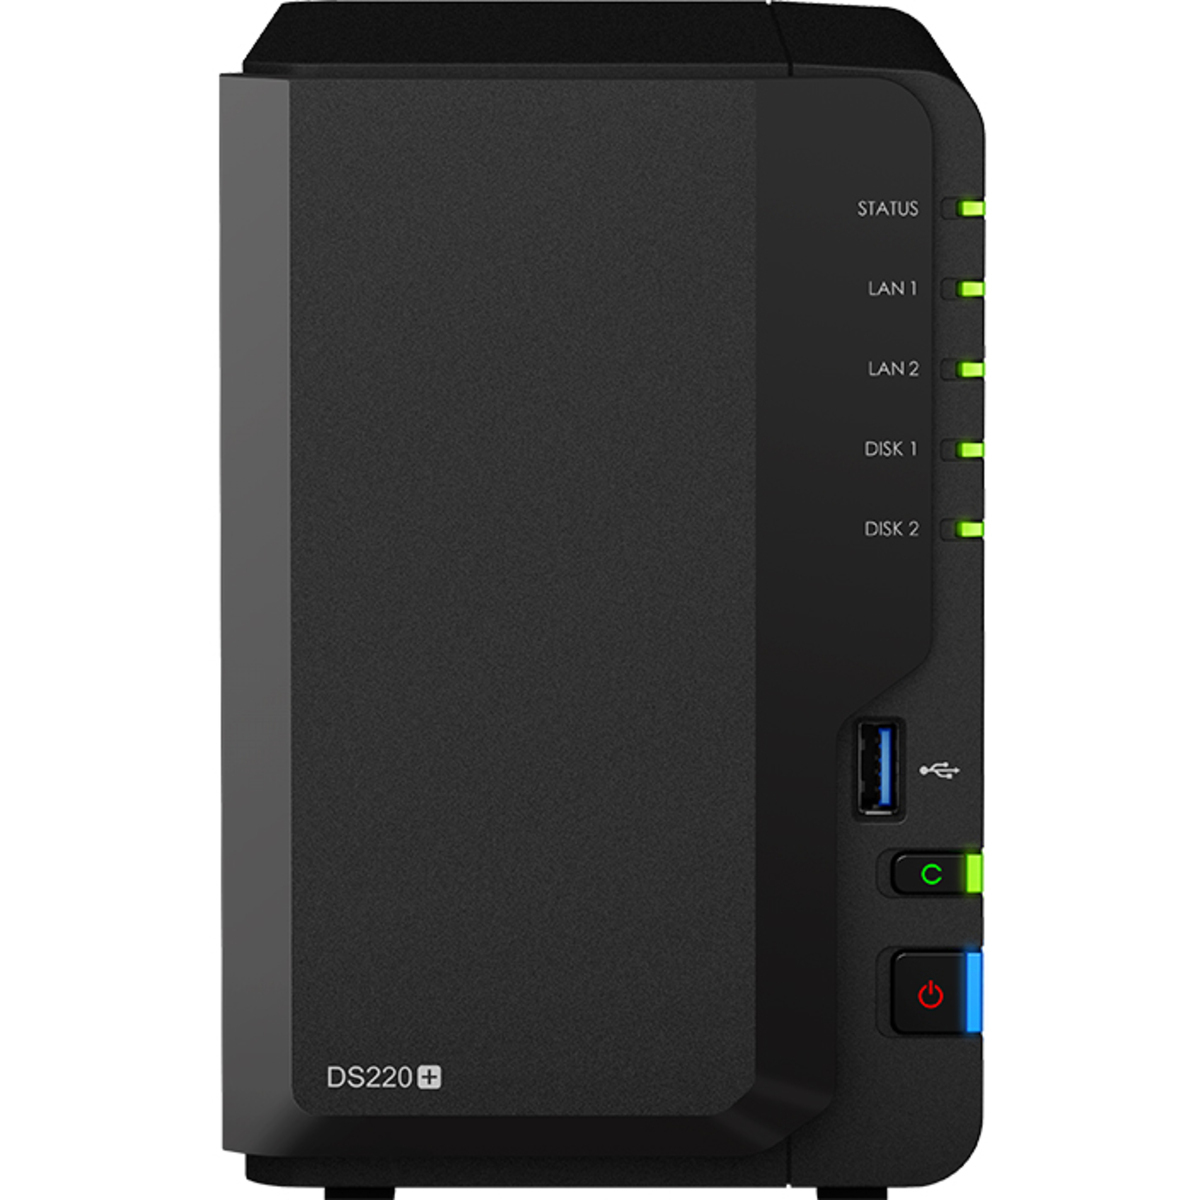 buy $521 Synology DiskStation DS220+ 4tb Desktop NAS - Network Attached Storage Device 2x2000gb Seagate BarraCuda ST2000DM008 3.5 7200rpm SATA 6Gb/s HDD CONSUMER Class Drives Installed - Burn-In Tested - ON SALE - FREE RAM UPGRADE - nas headquarters buy network attached storage server device das new raid-5 free shipping usa christmas new year holiday sale DiskStation DS220+